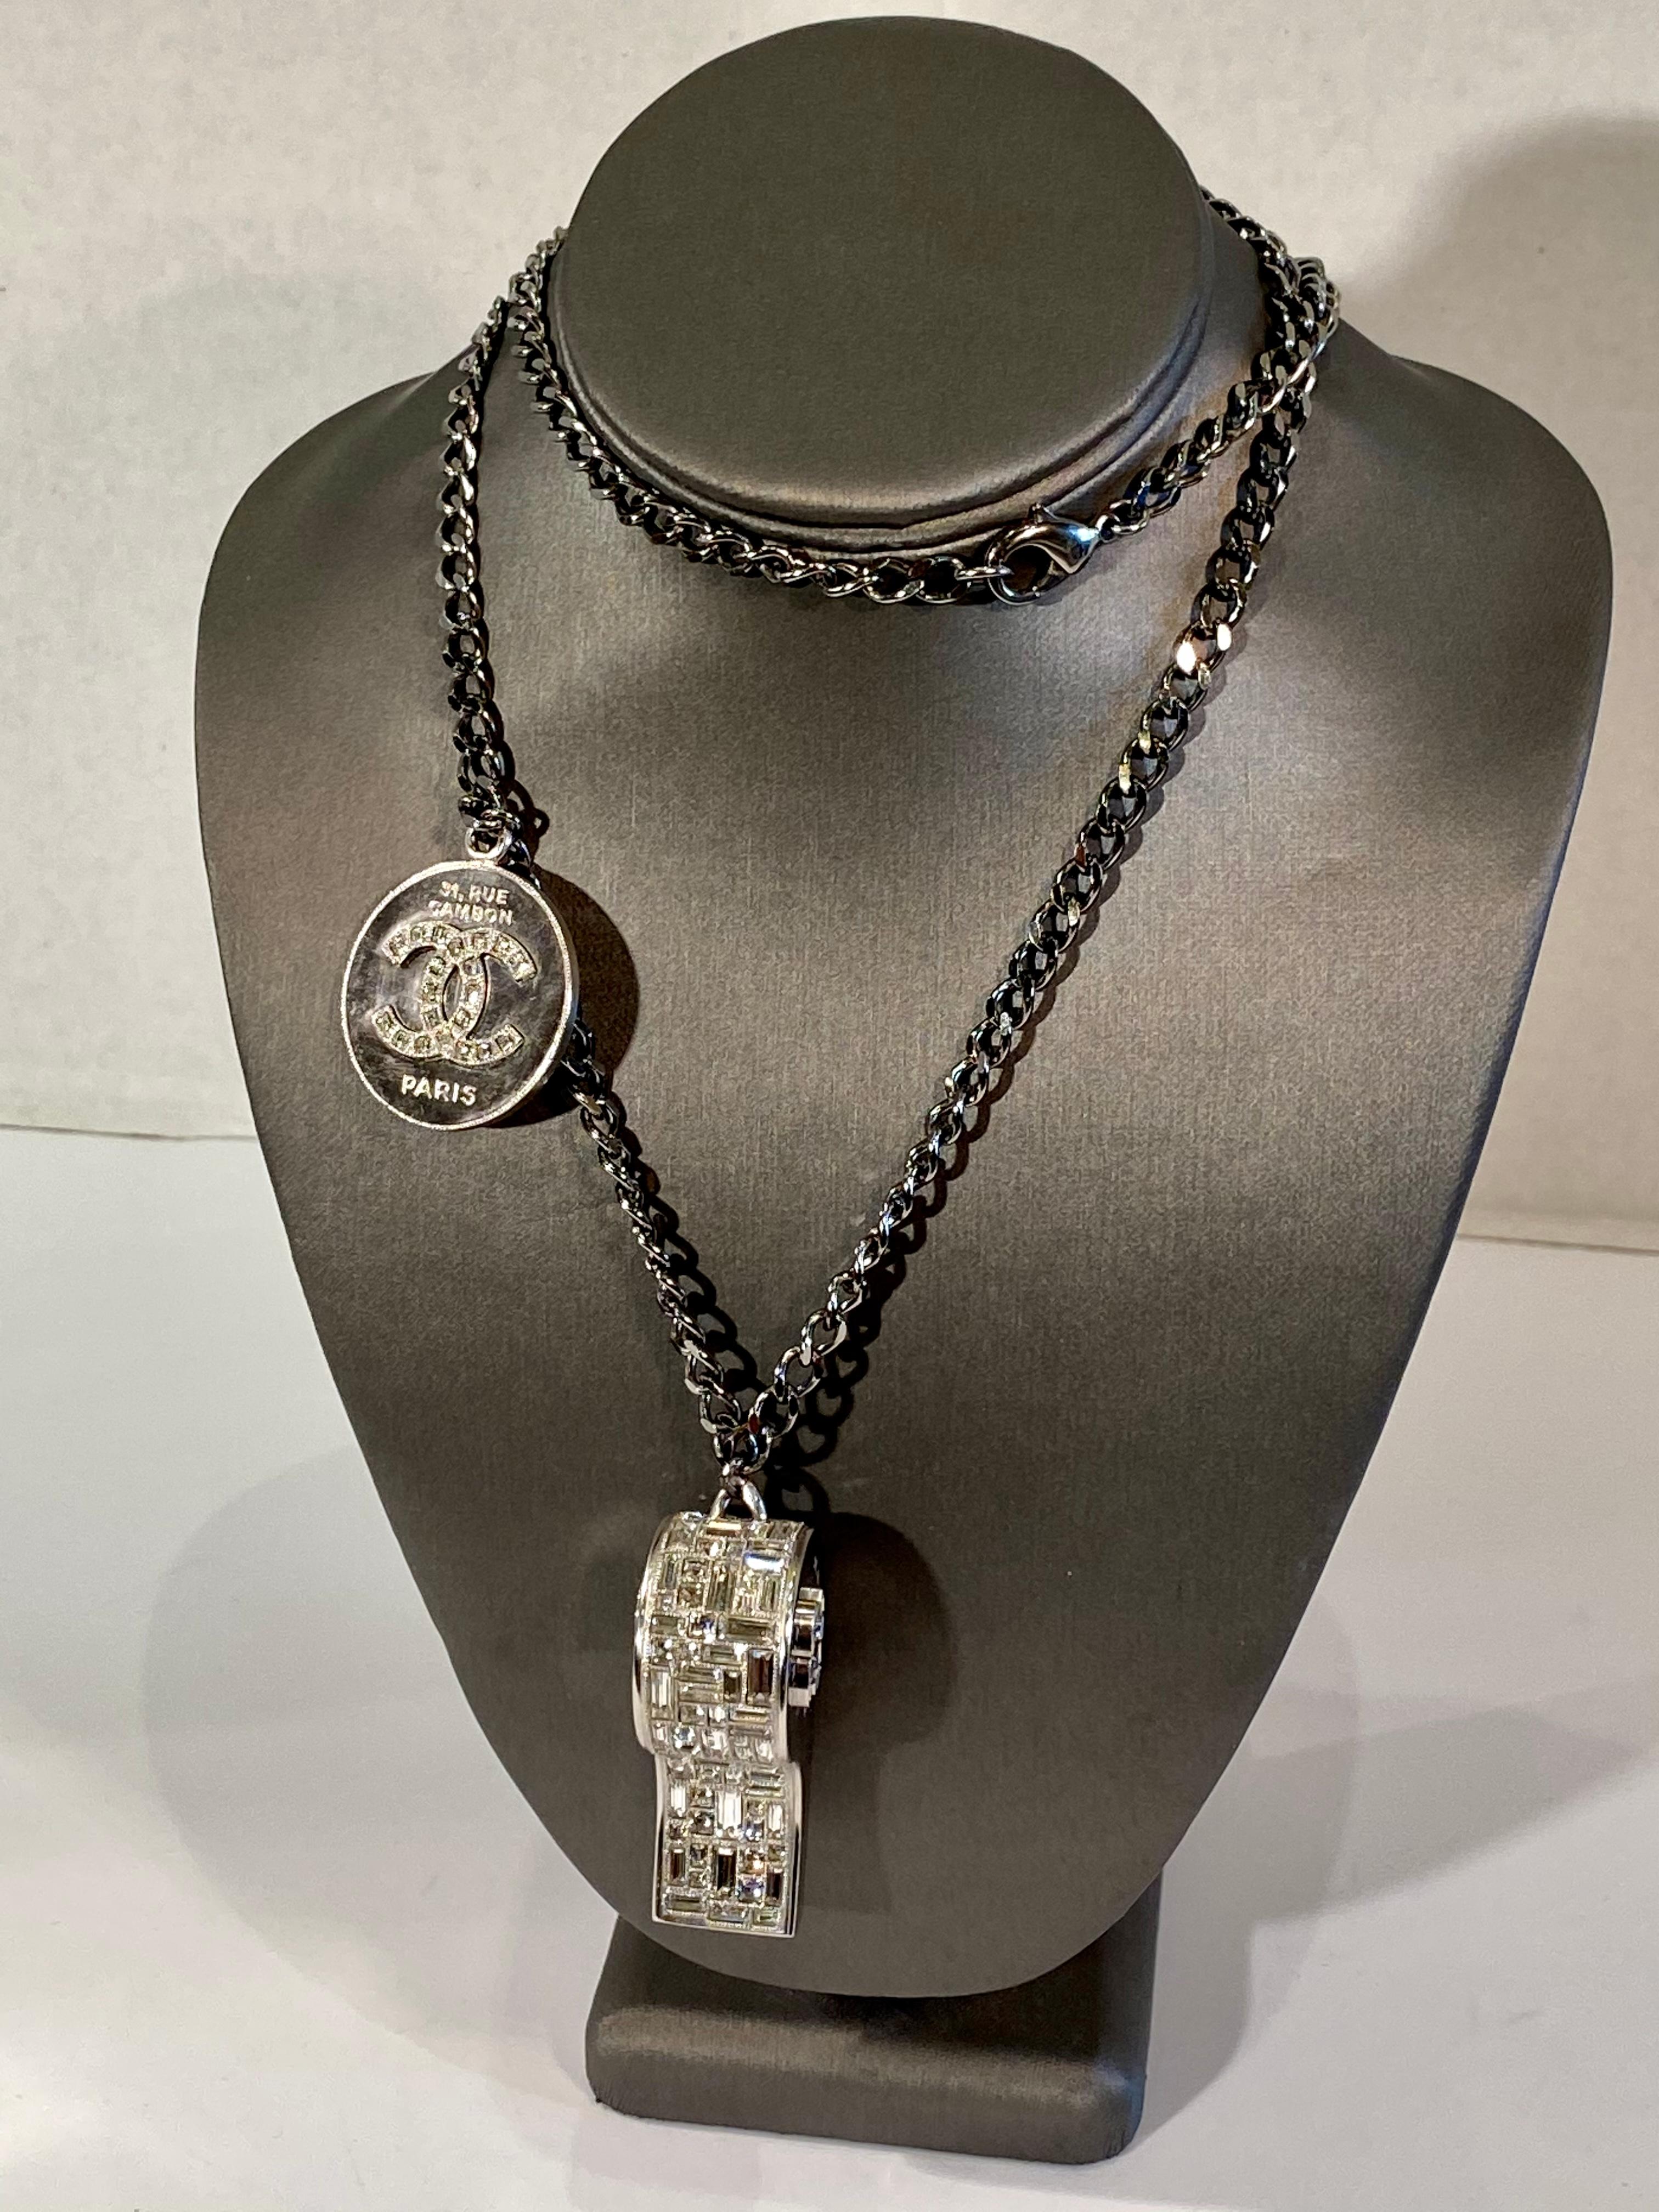 Rare and fabulous, fancy Chanel whistle pendant necklace from the Spring/Summer 2015 collection.  Crafted of silver tone metal, the whistle is exquisitely encrusted with baguette and square shaped Swarovski crystals and hangs from a ruthenium plated